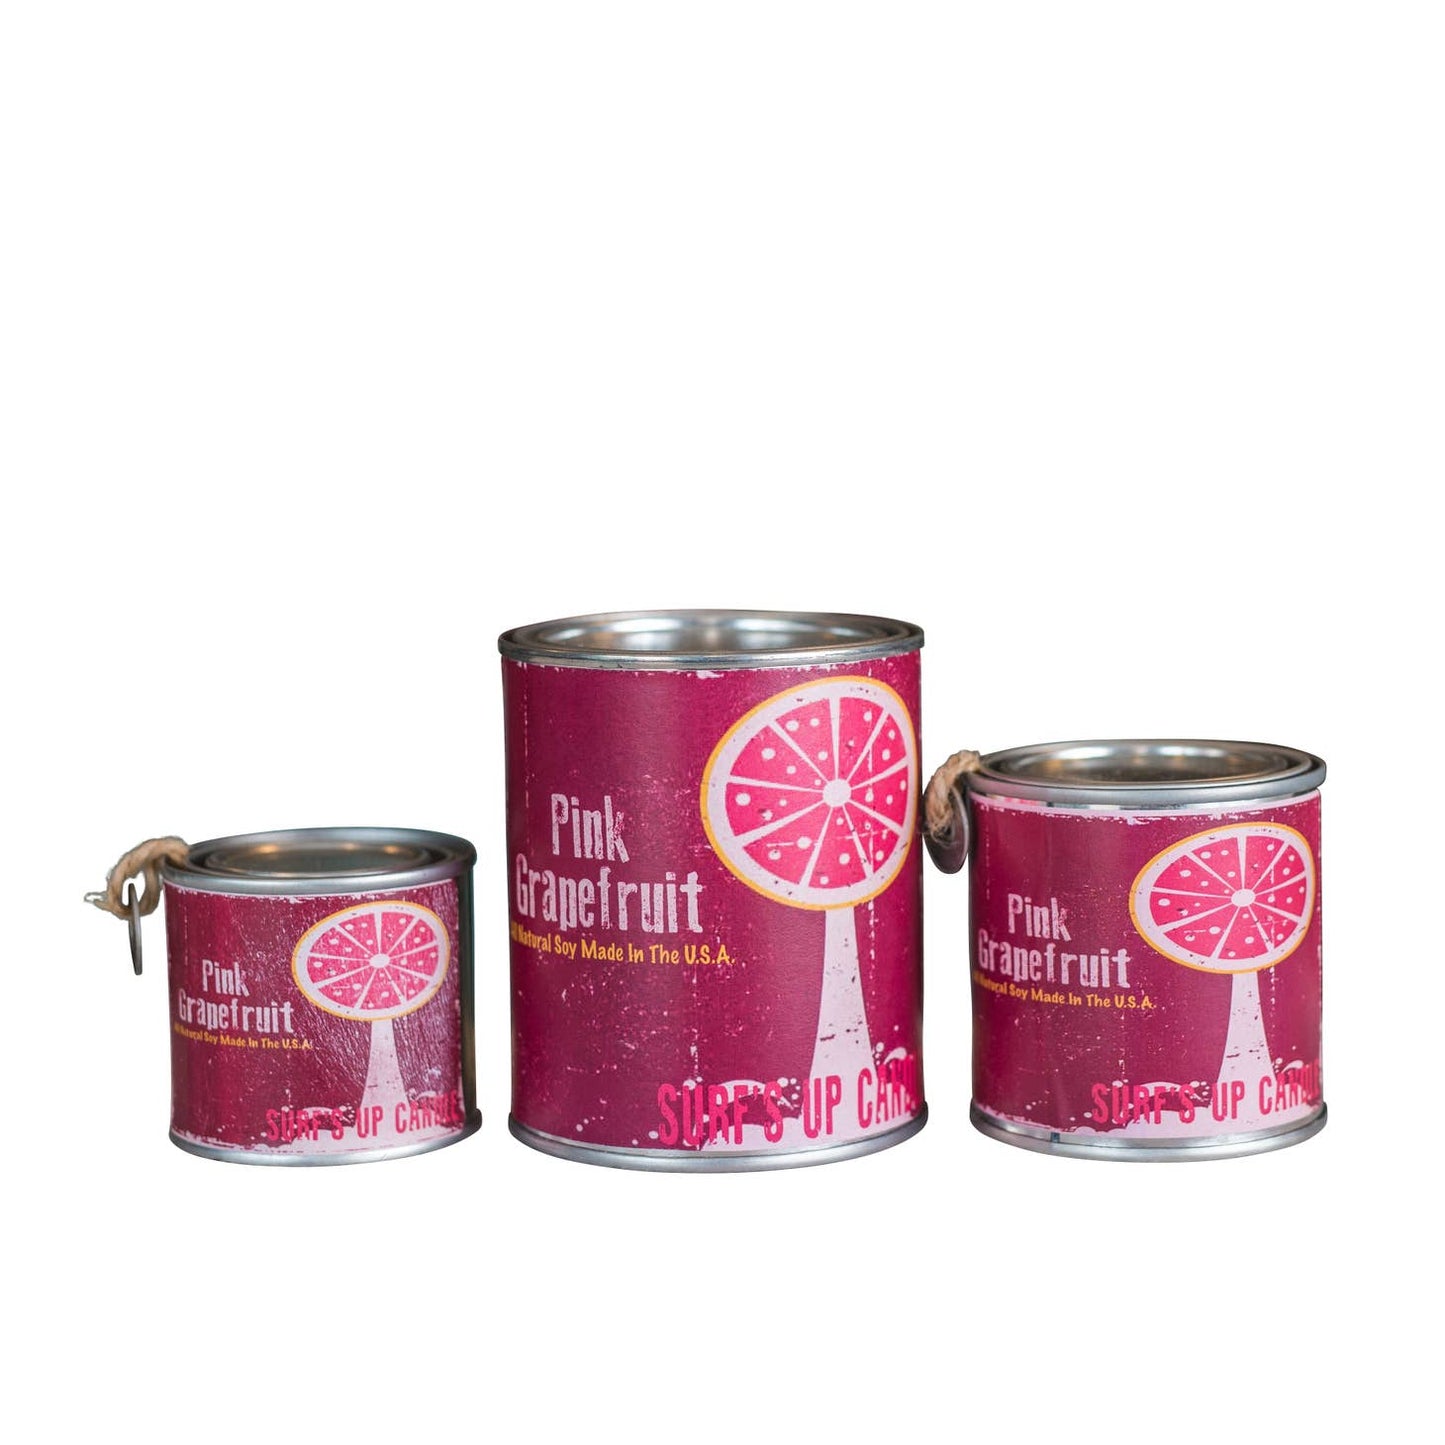 SURFS UP PINK GRAPEFRUIT PAINT CAN CANDLE PINT